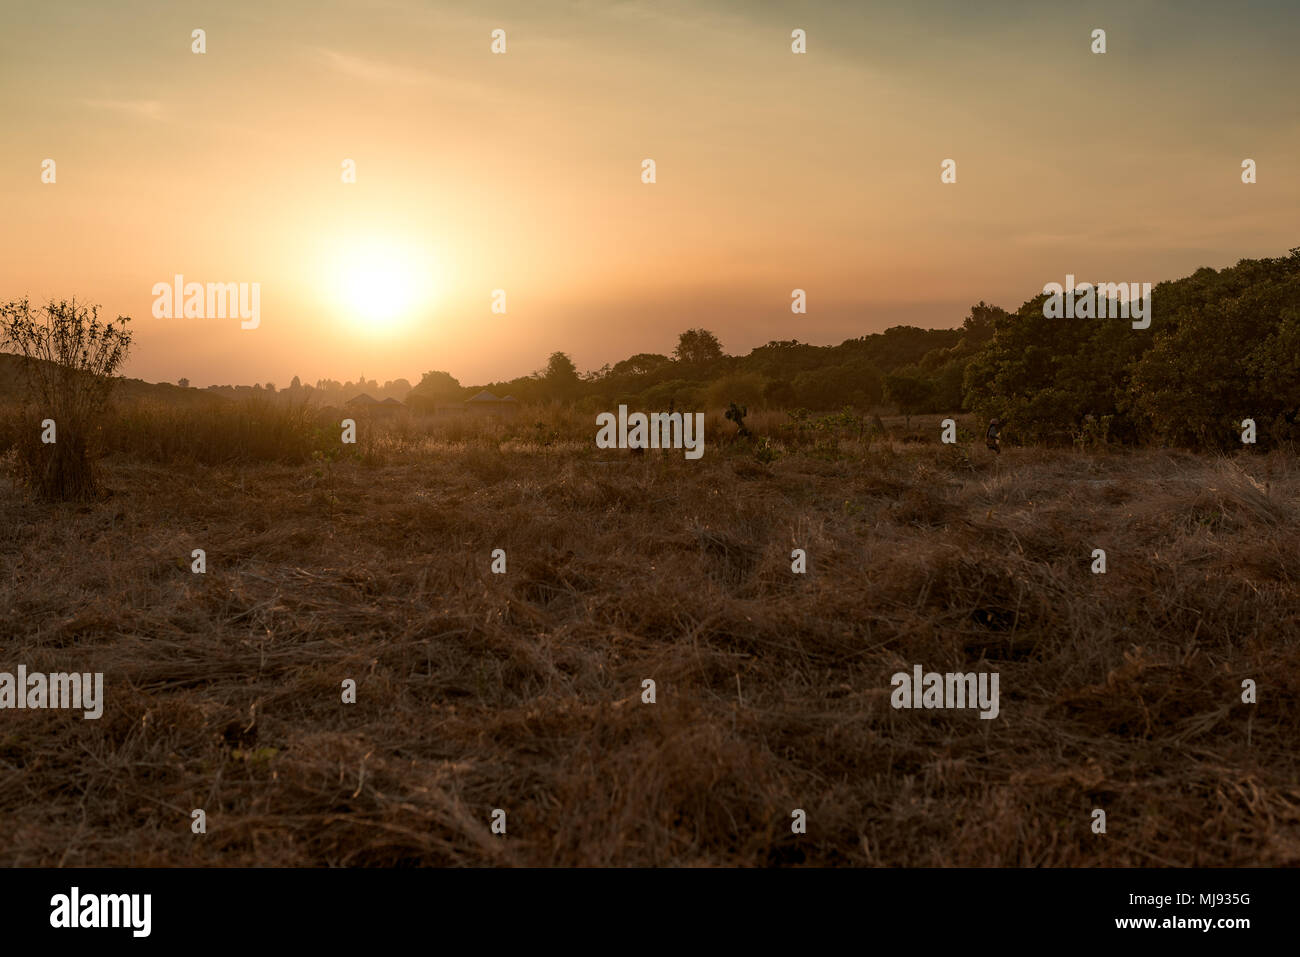 Sunset  with beautiful meadow in the background in Banlung province, Cambodia. Stock Photo